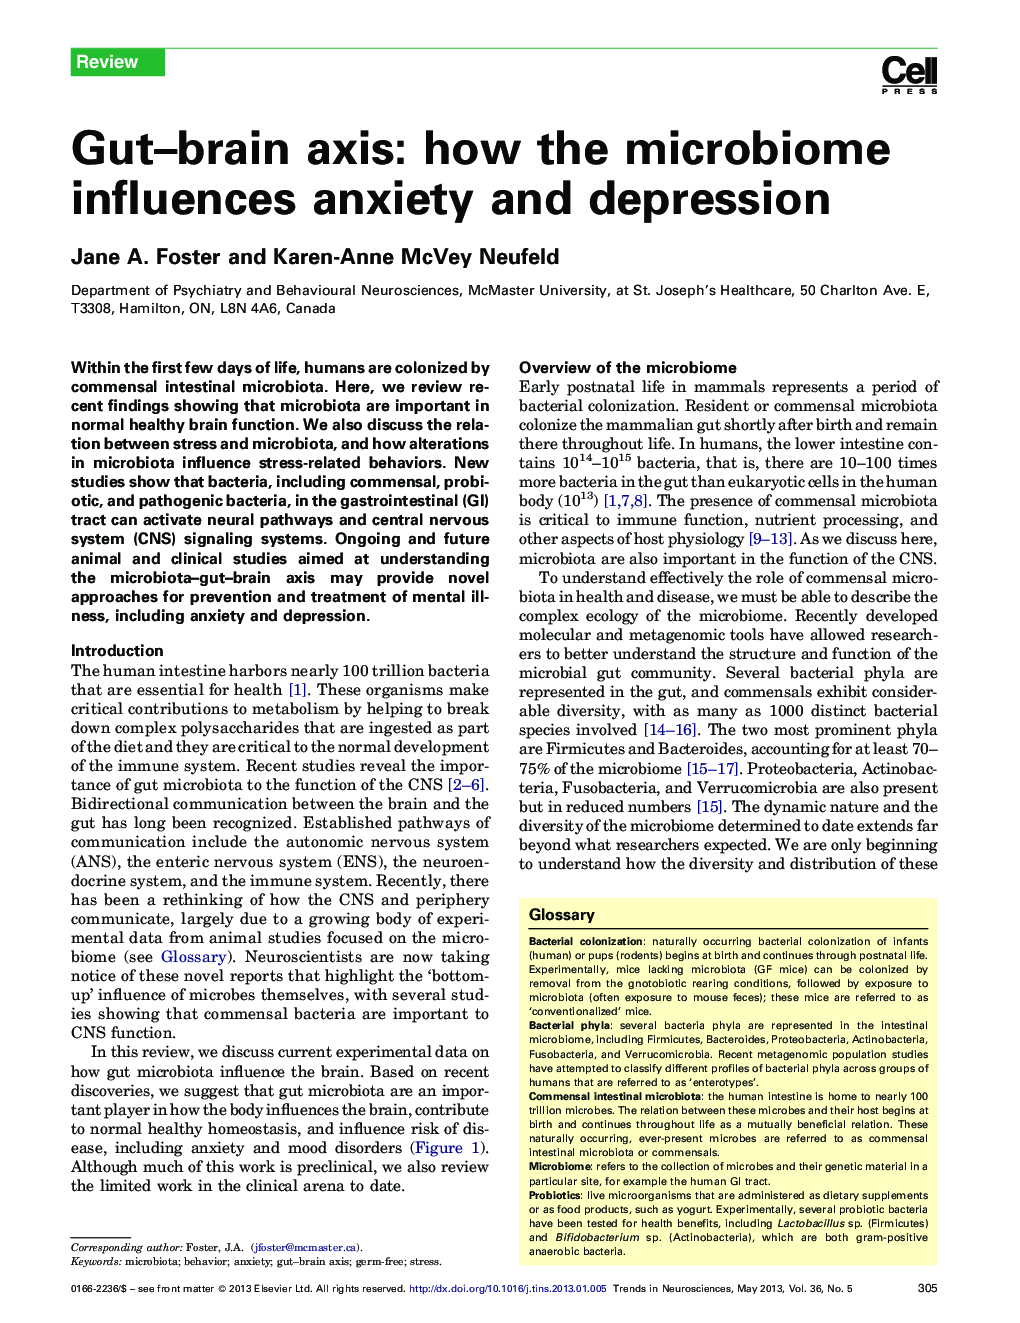 Gut–brain axis: how the microbiome influences anxiety and depression